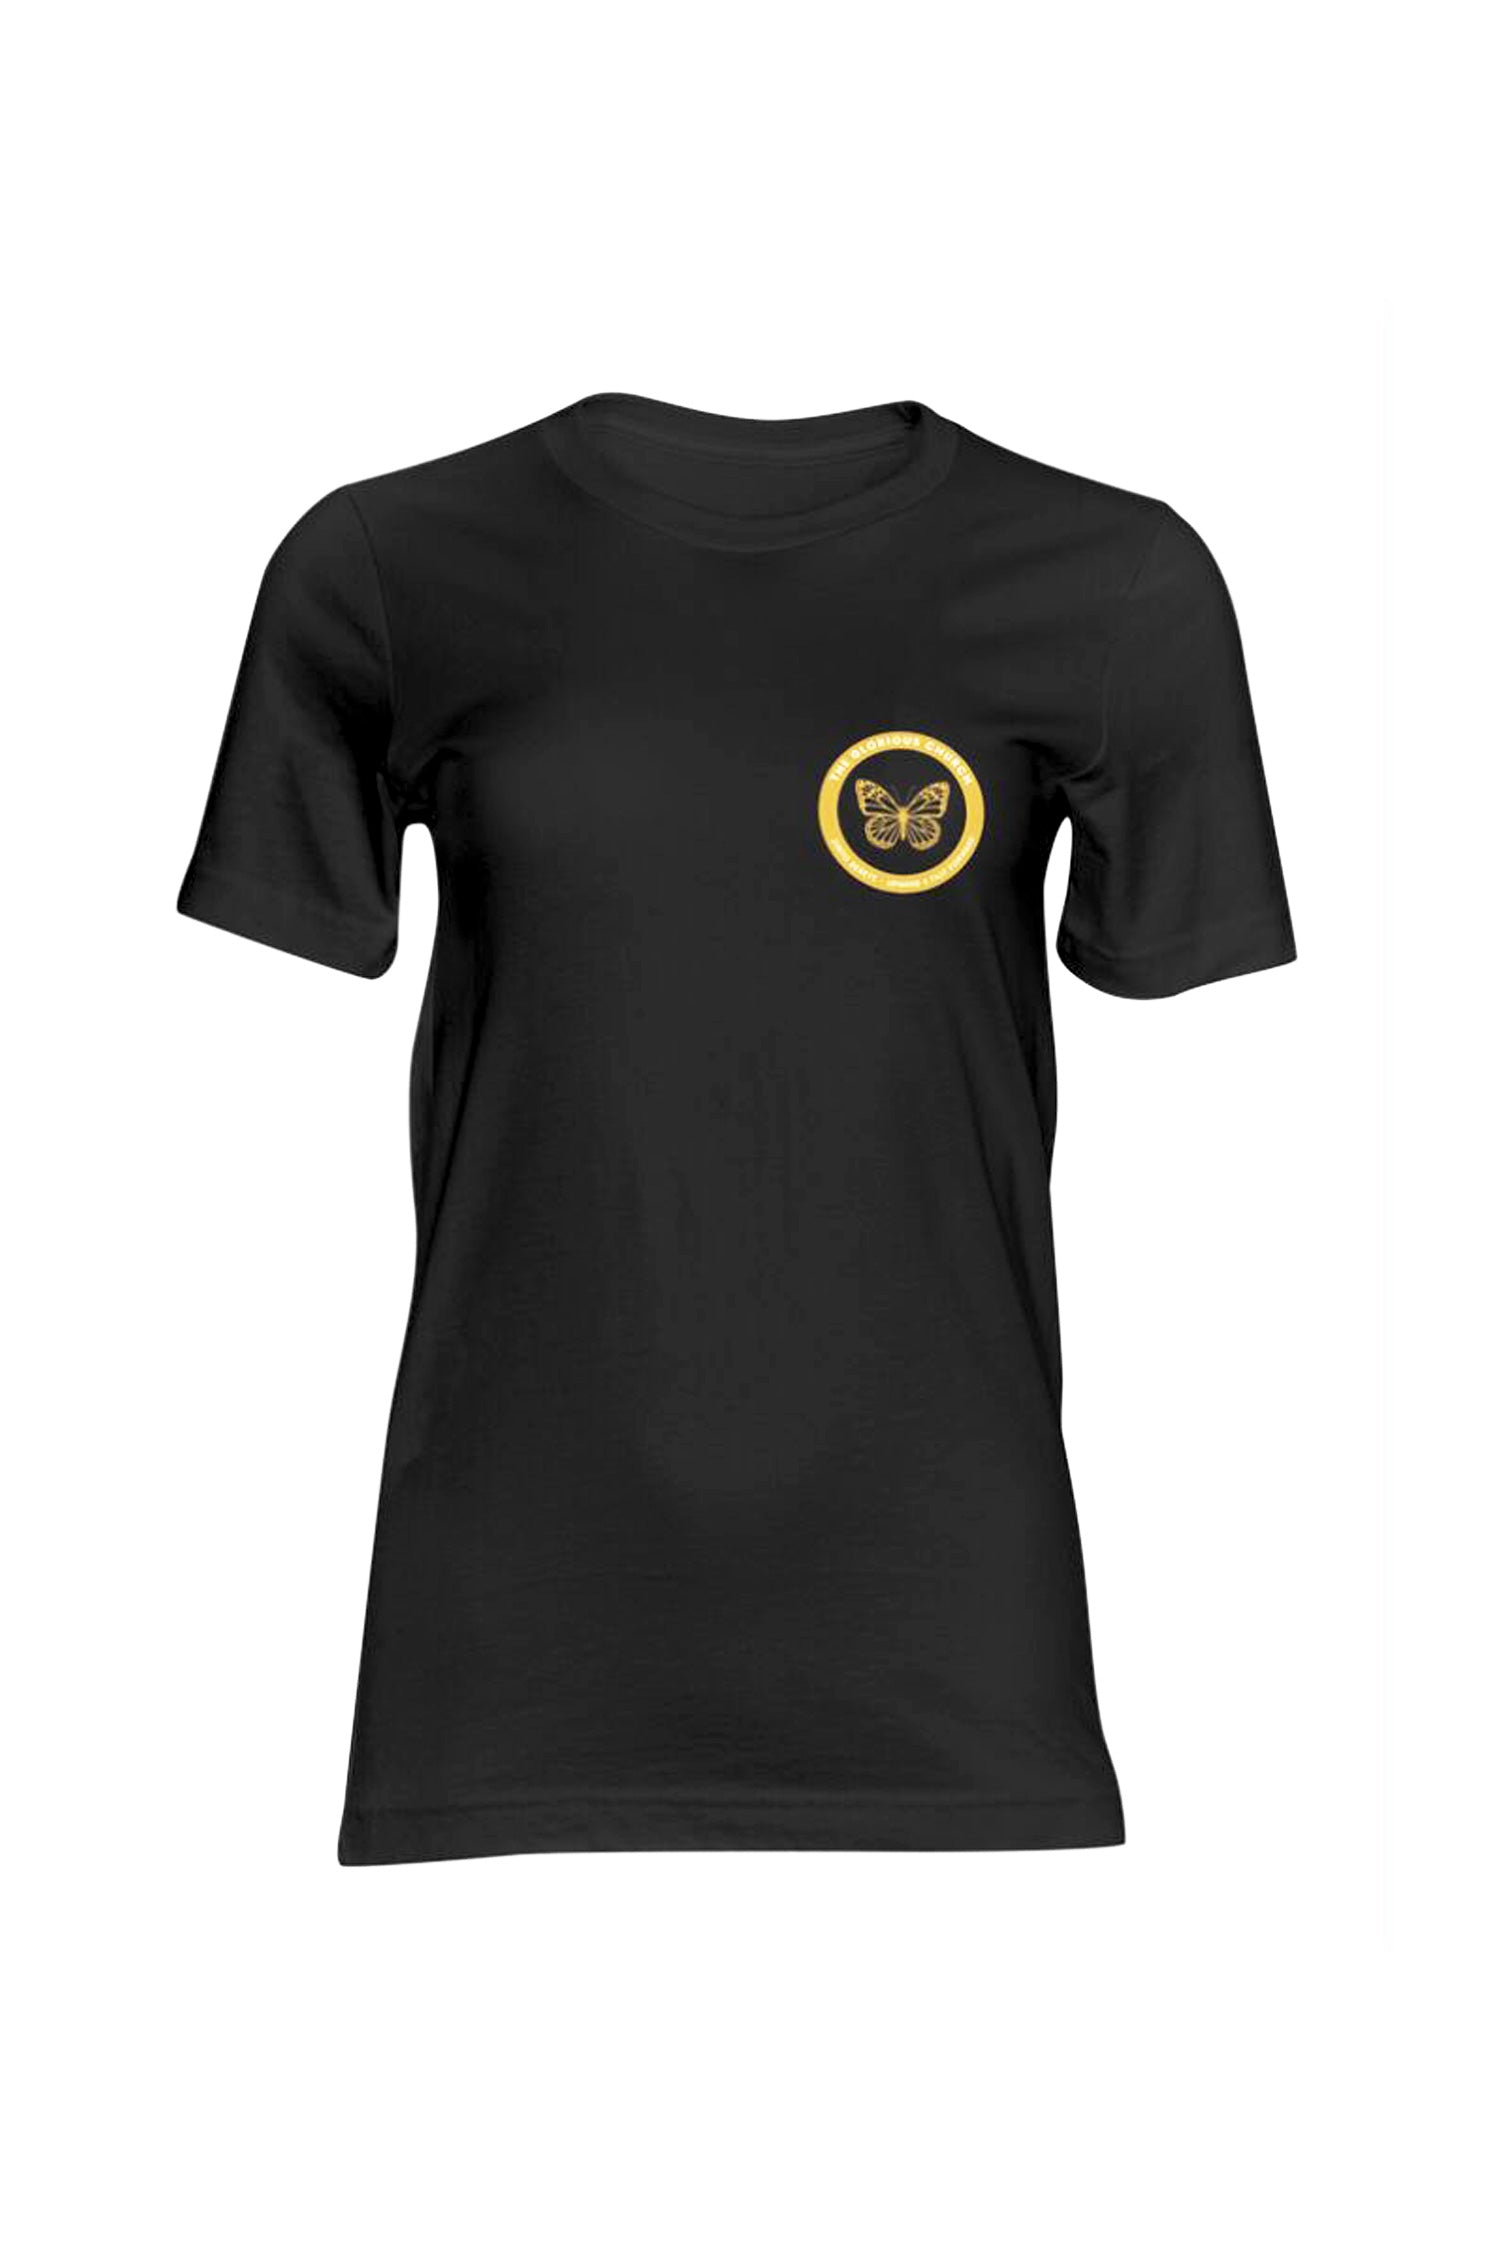 What a Mighty God We Serve - Black Tee - Unisex